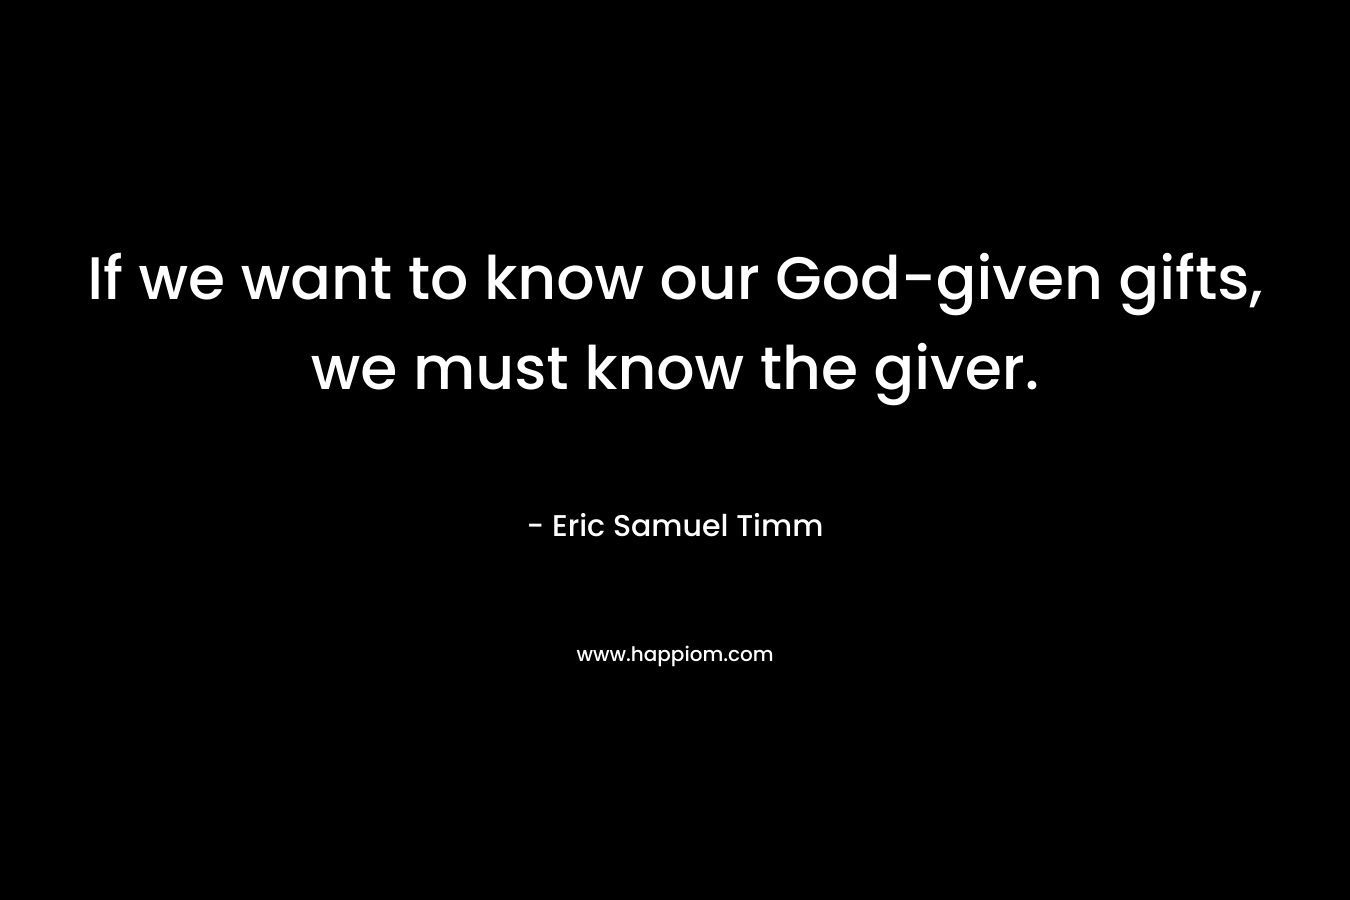 If we want to know our God-given gifts, we must know the giver.